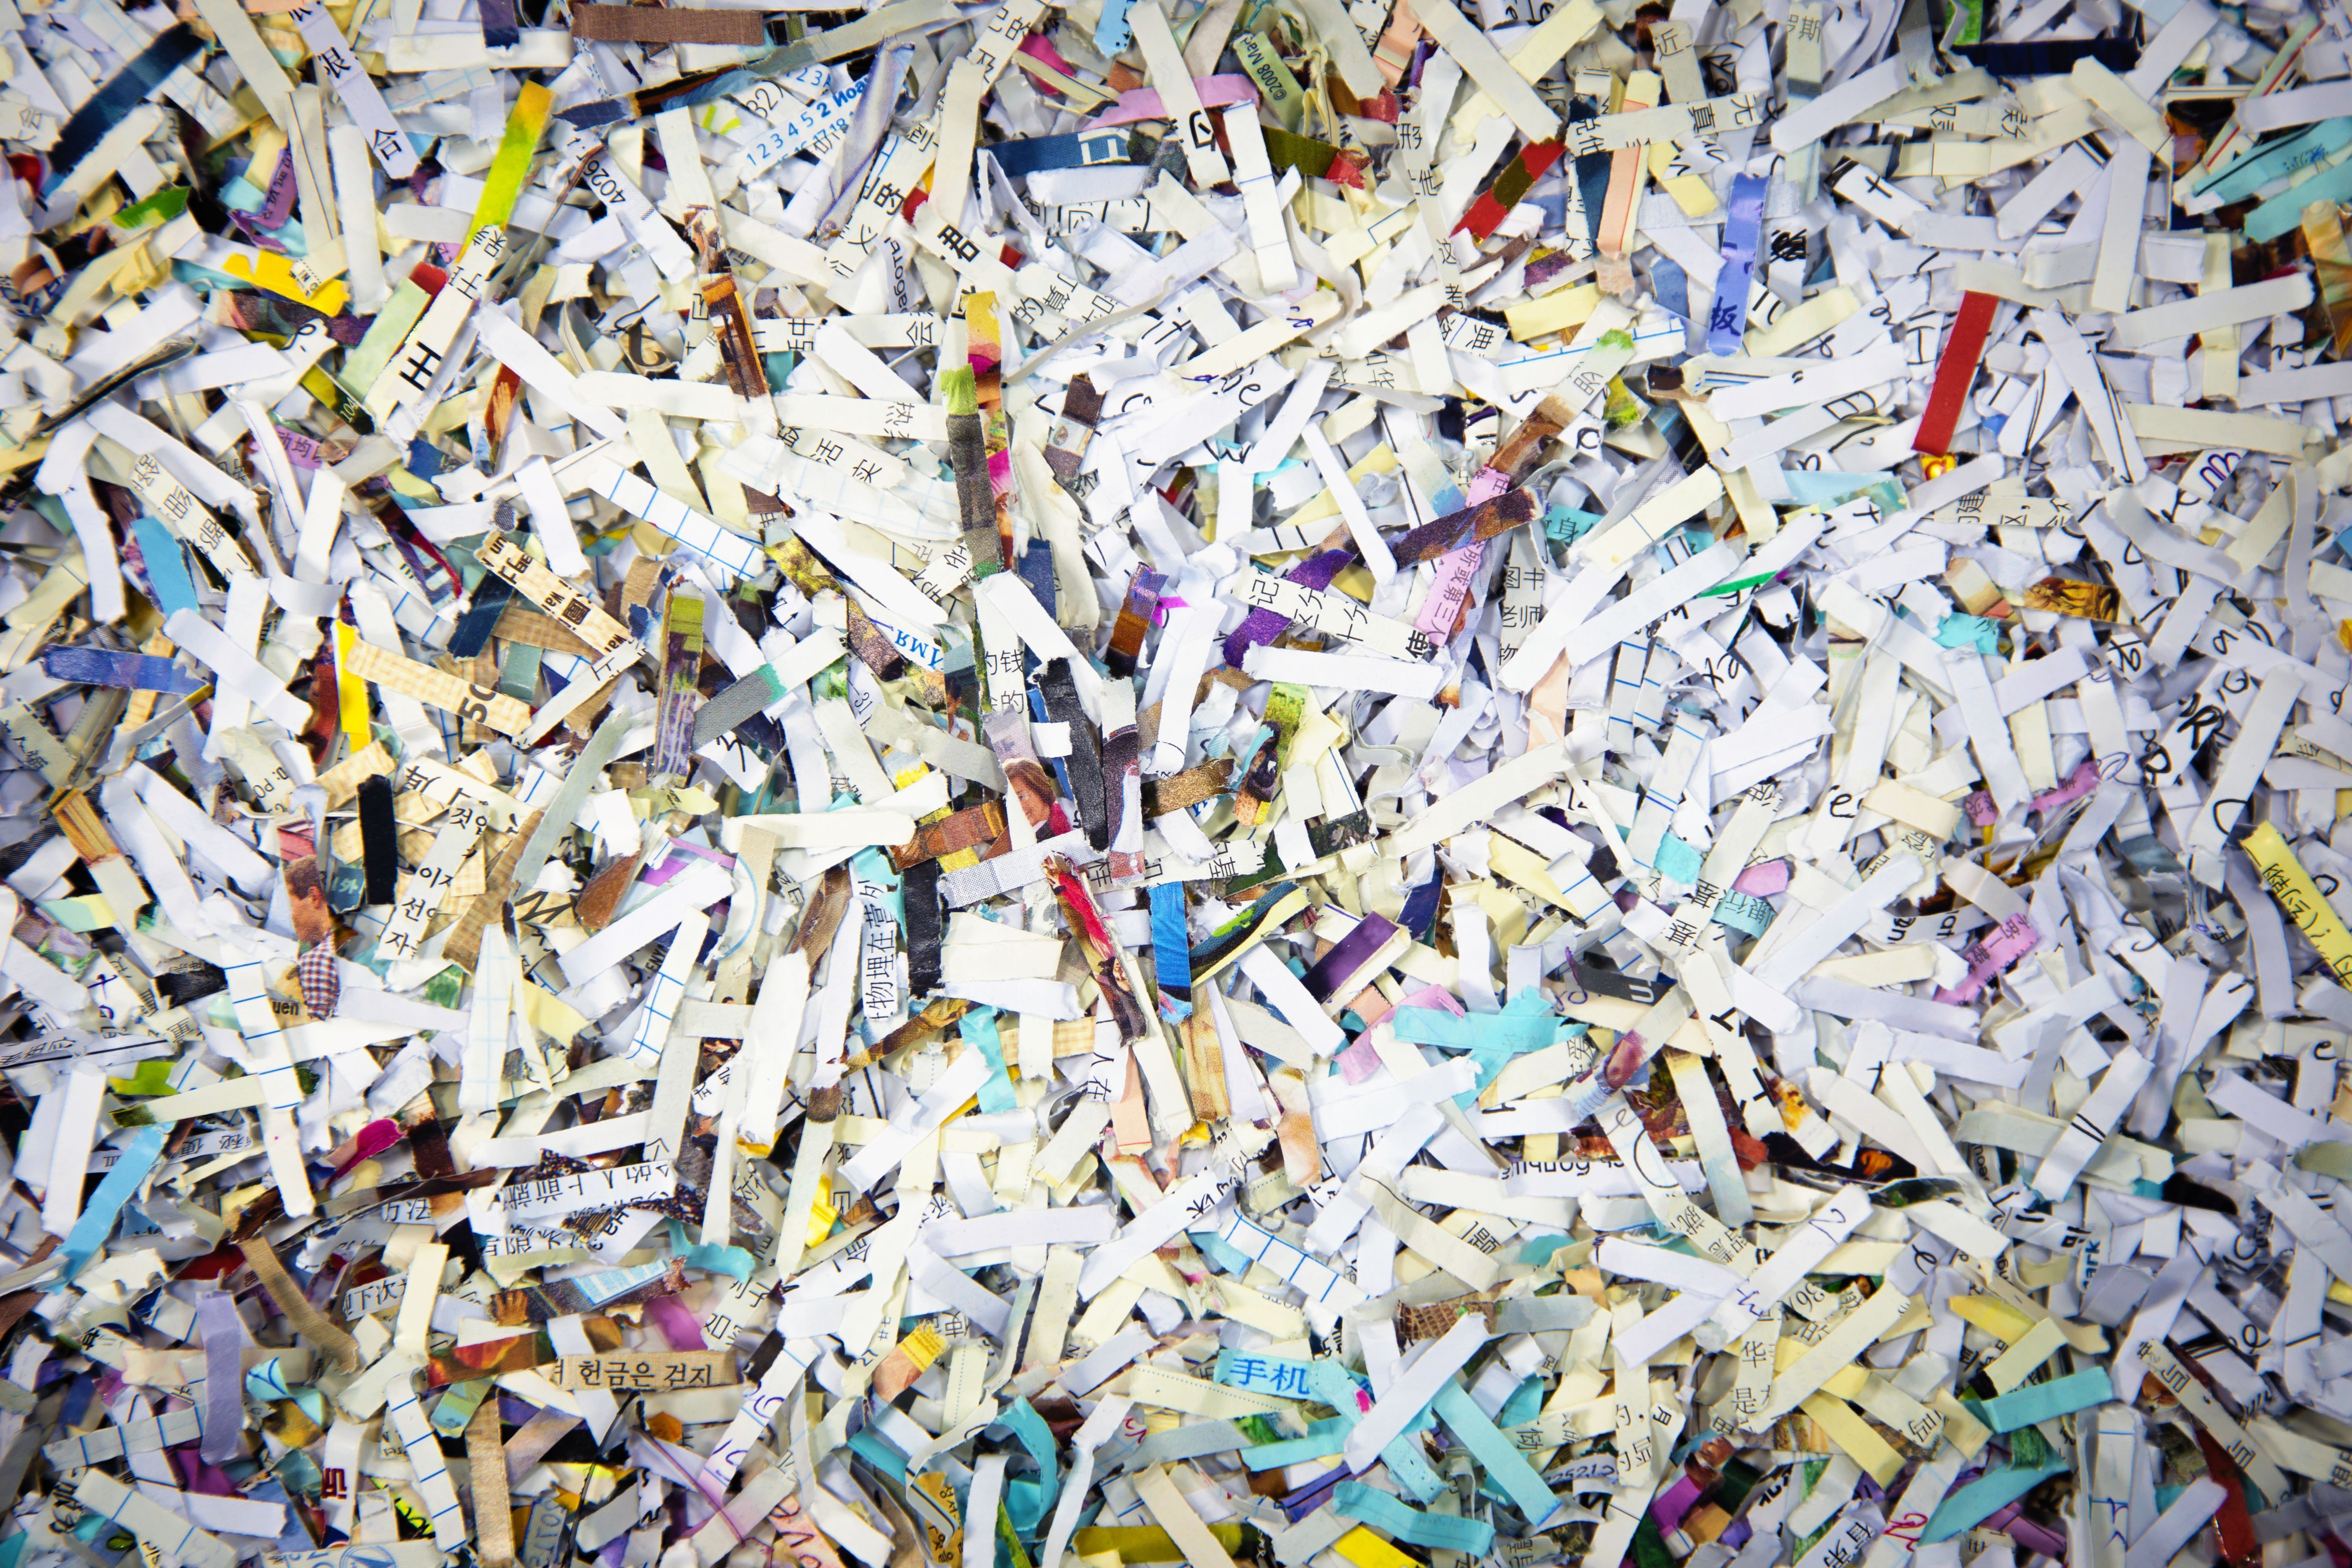 Beaufort County Offers Free Secure Shredding Event in Bluffton January 11